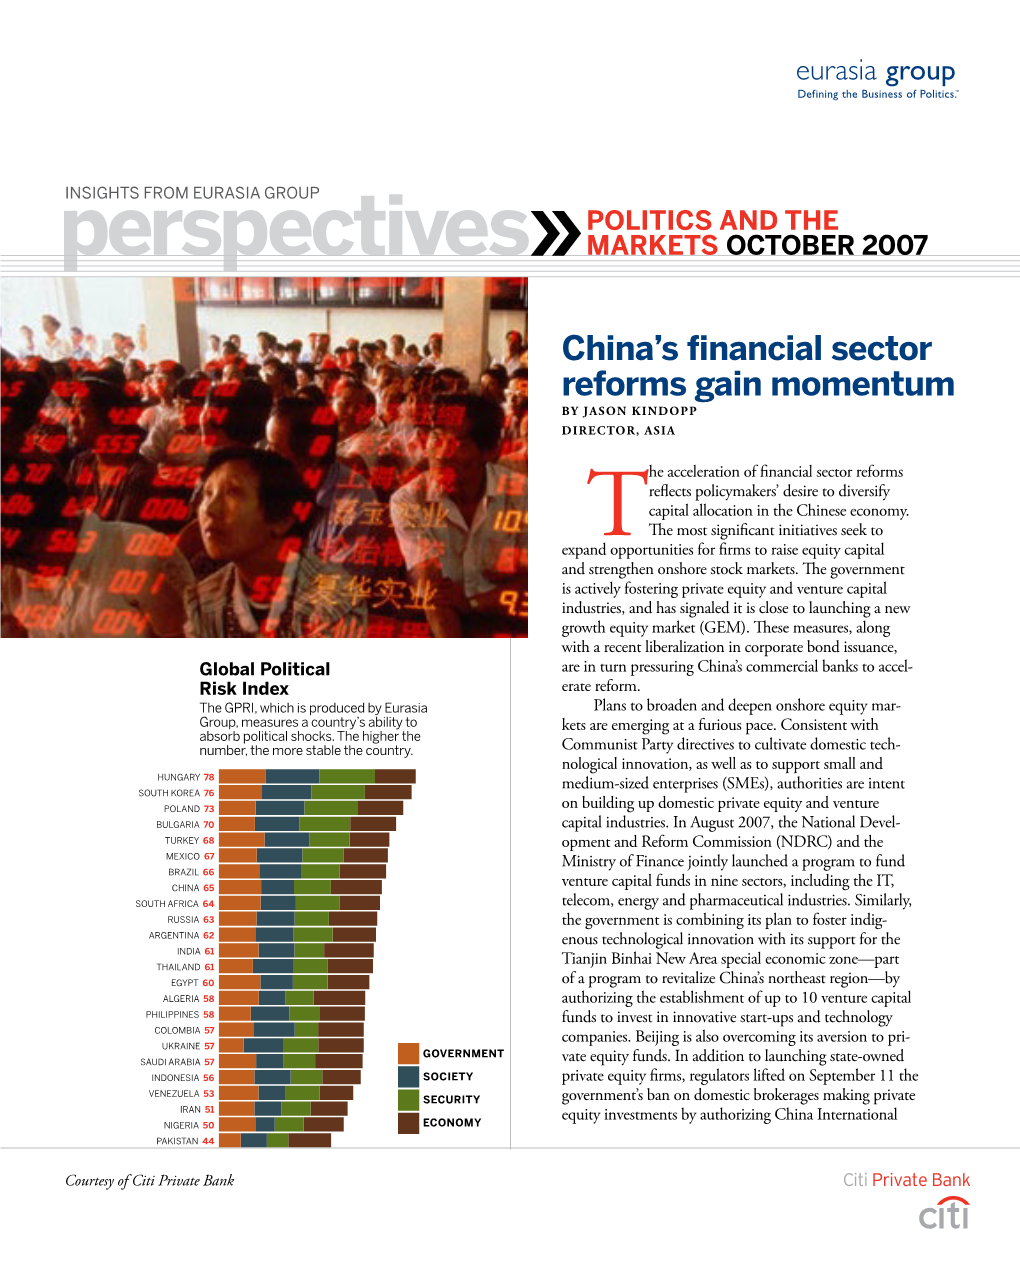 China's Financial Sector Reforms Gain Momentum